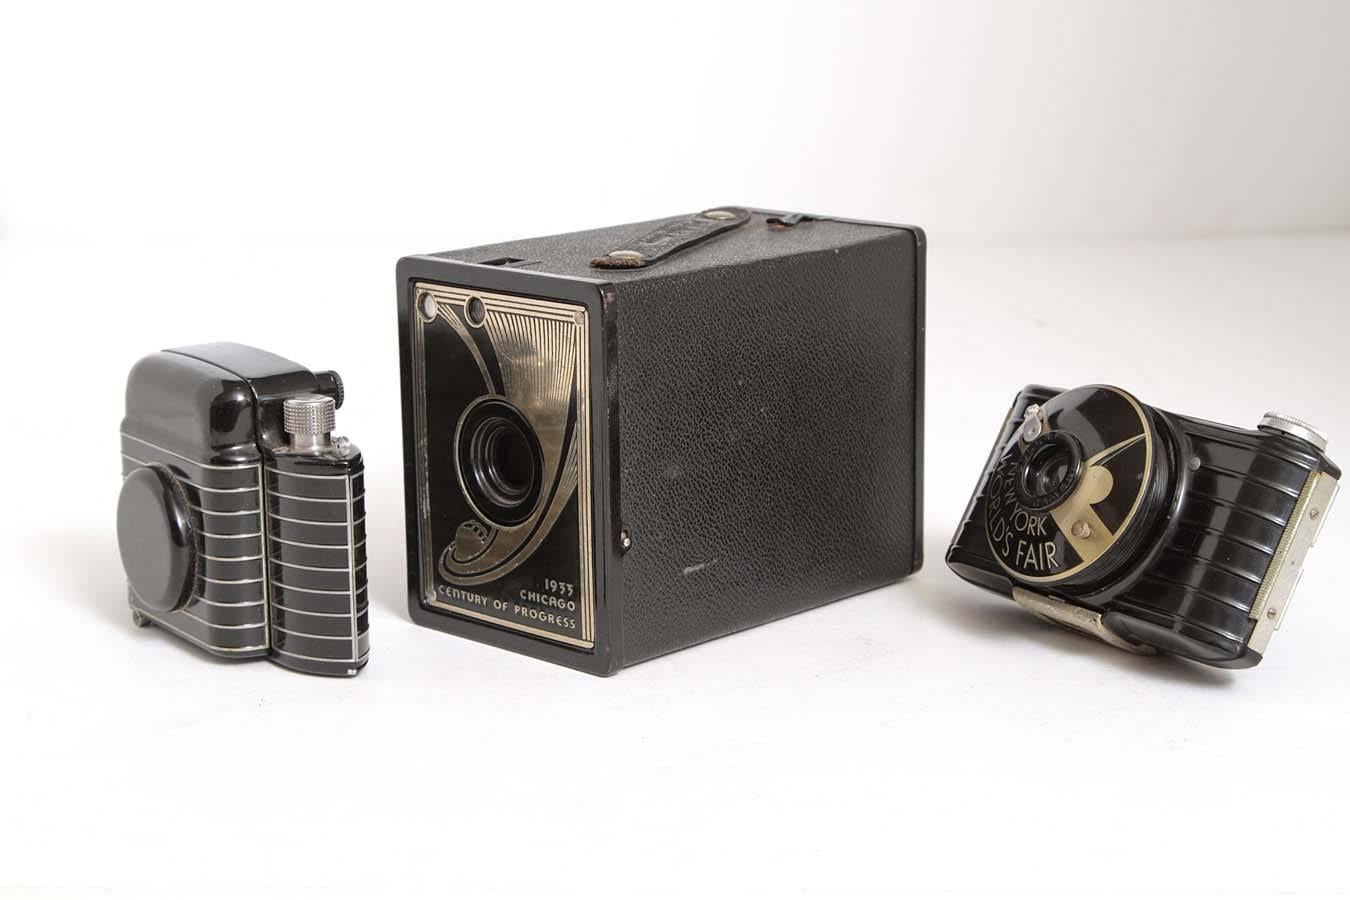 Nice set of 1930s Walter Dorwin Teague embellished designs for Kodak.

The cast aluminum black-enameled speed-lined Bantam is an iconic Art Deco Teague form from 1936-1948. An early streamline clam-shell camera design, making it pocket-portable, a